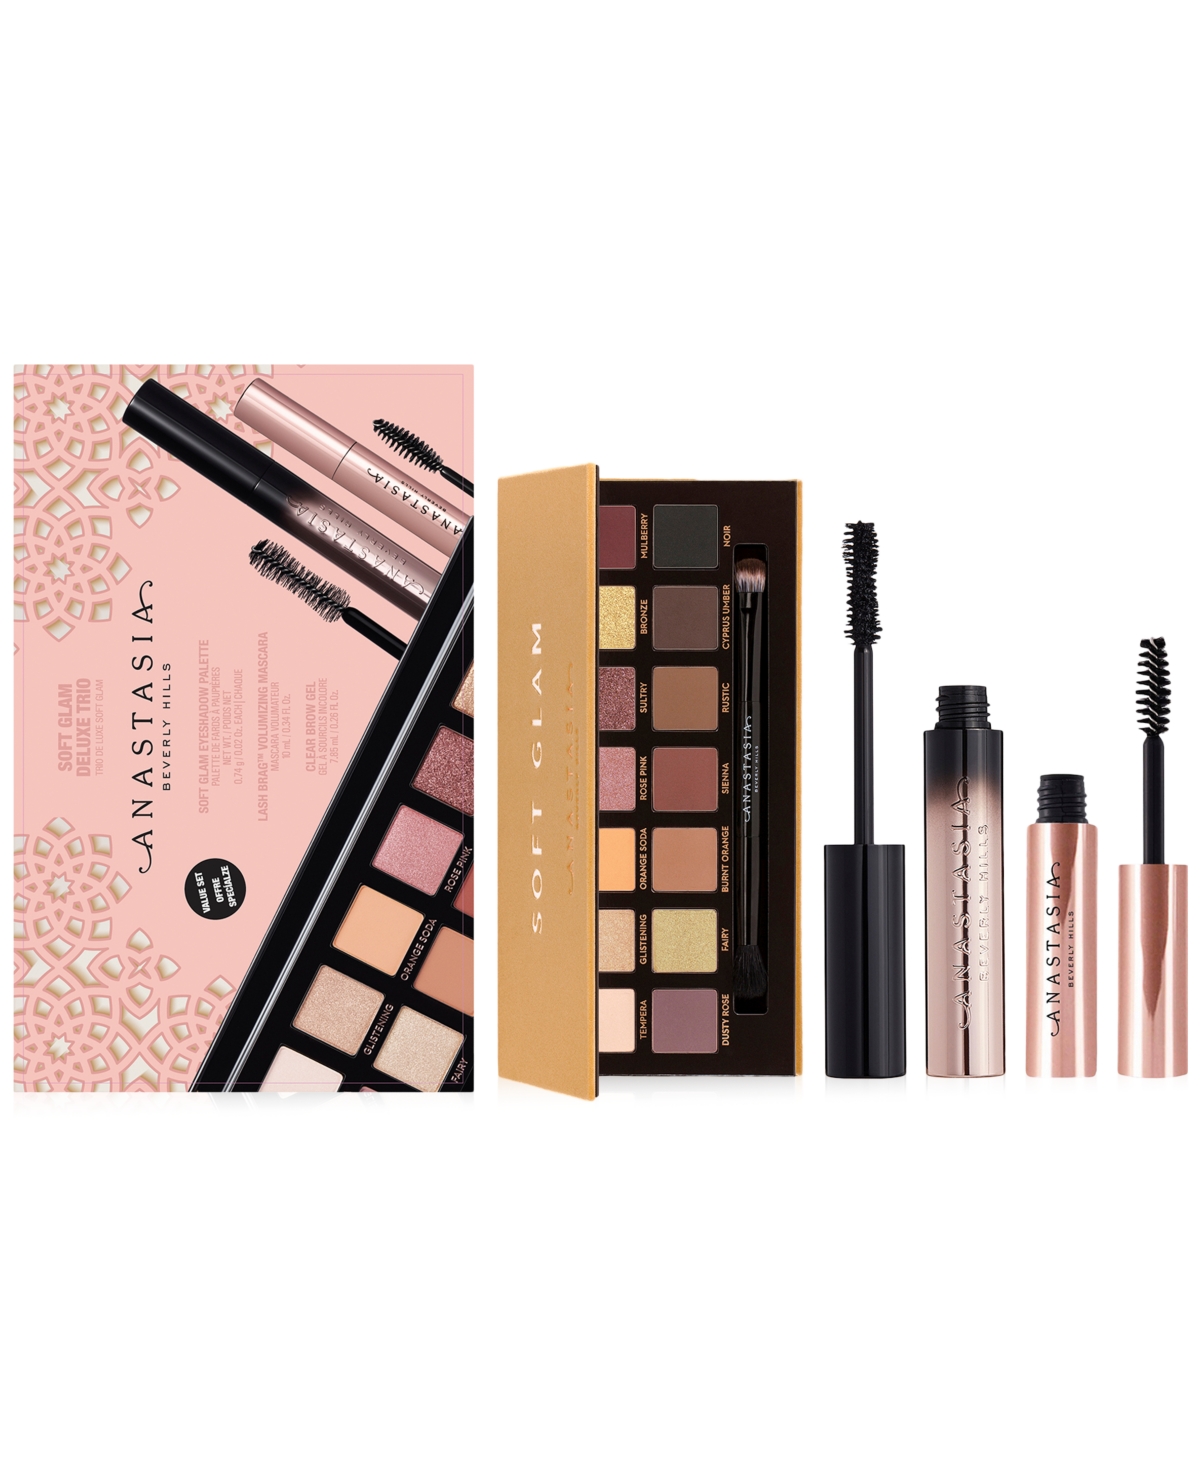 3-Pc Anastasia Beverly Hills Soft Glam Deluxe Set (Eyeshadow Palette, Mascara, Brow Gel) $32.50 + Free Shipping